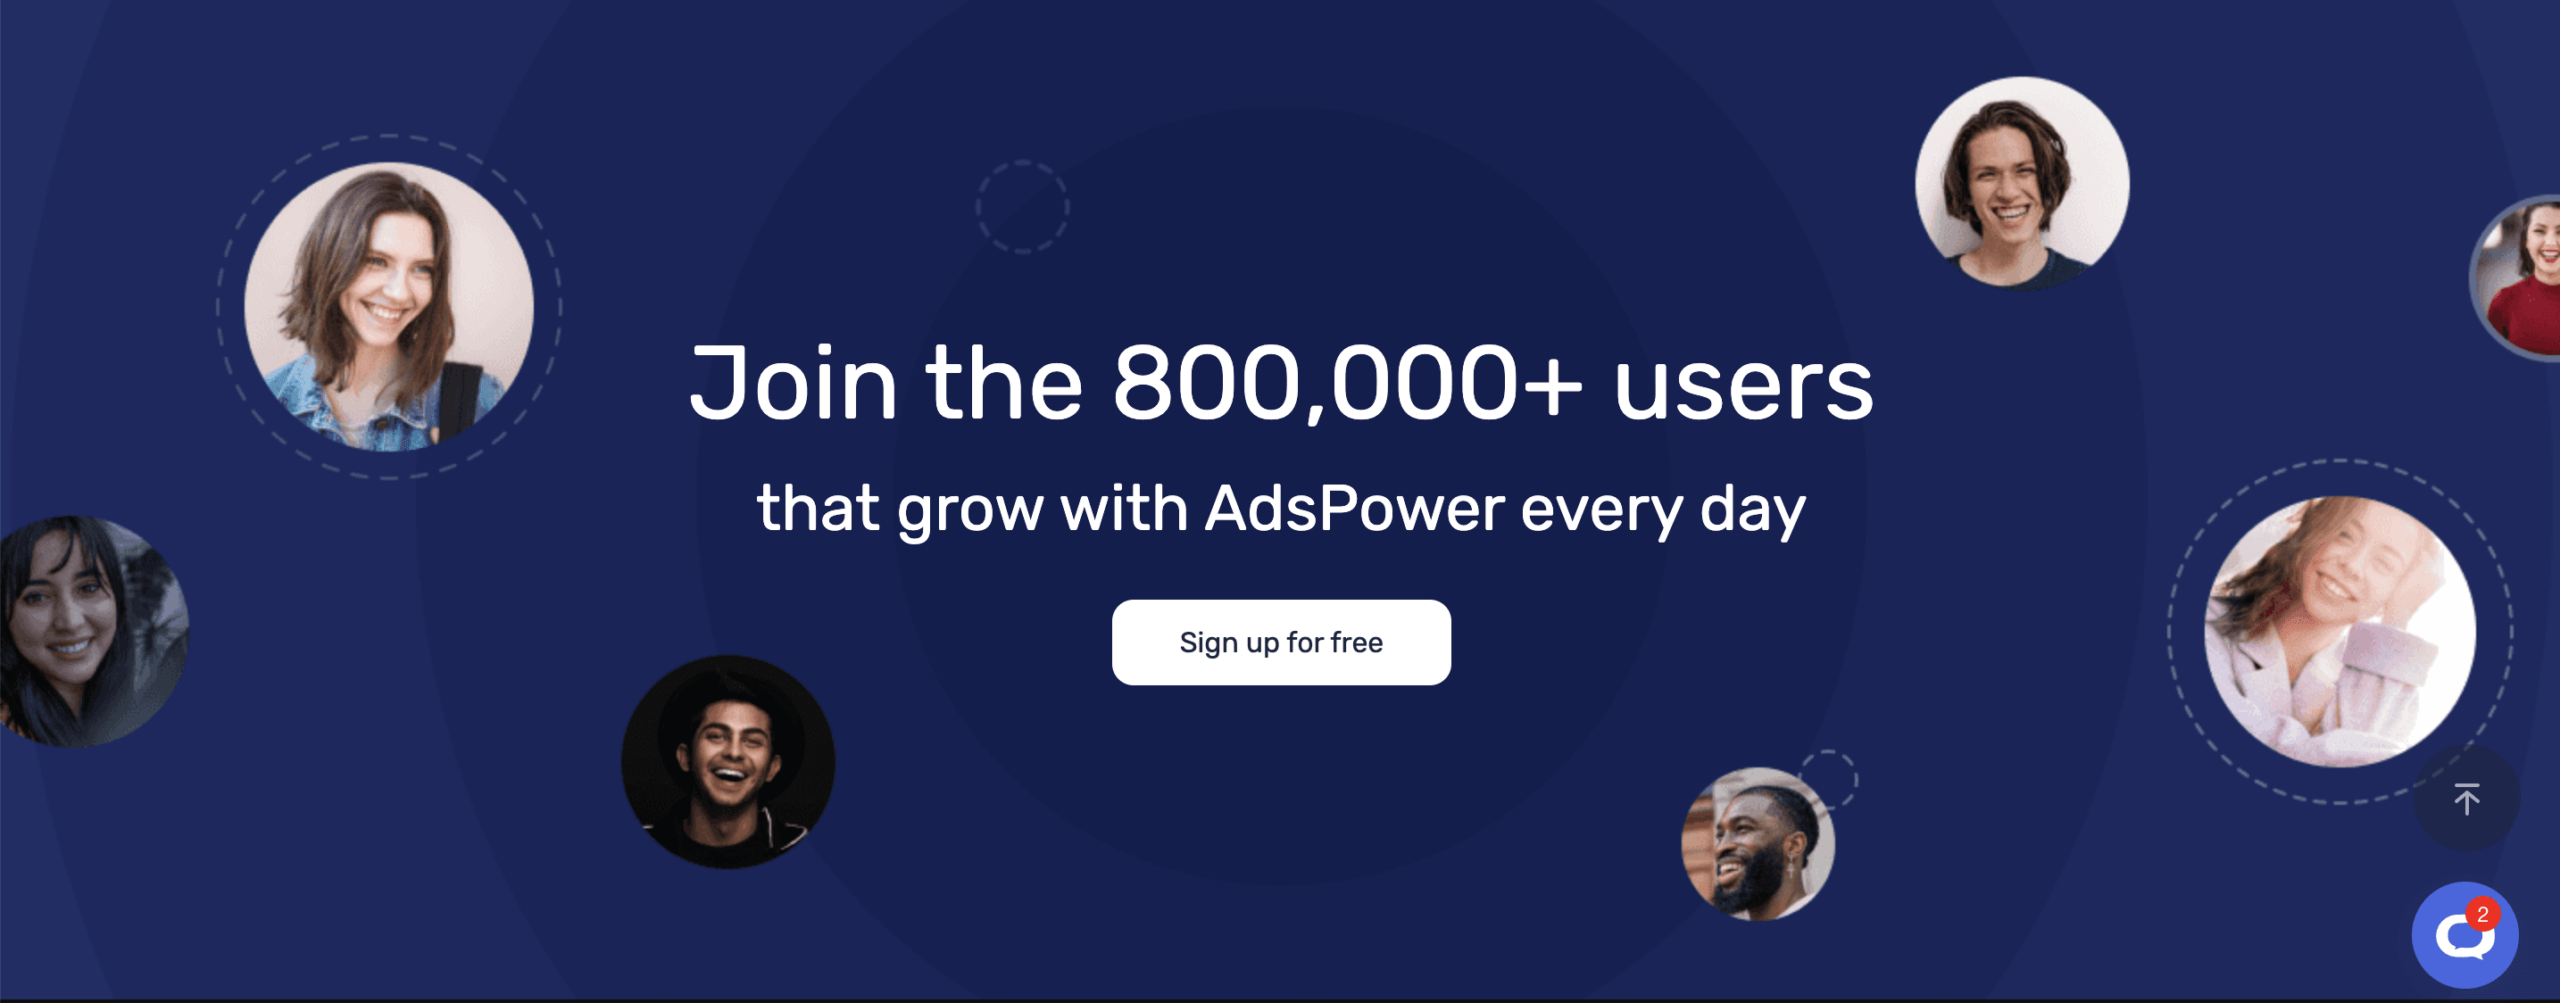 Join AdsPower